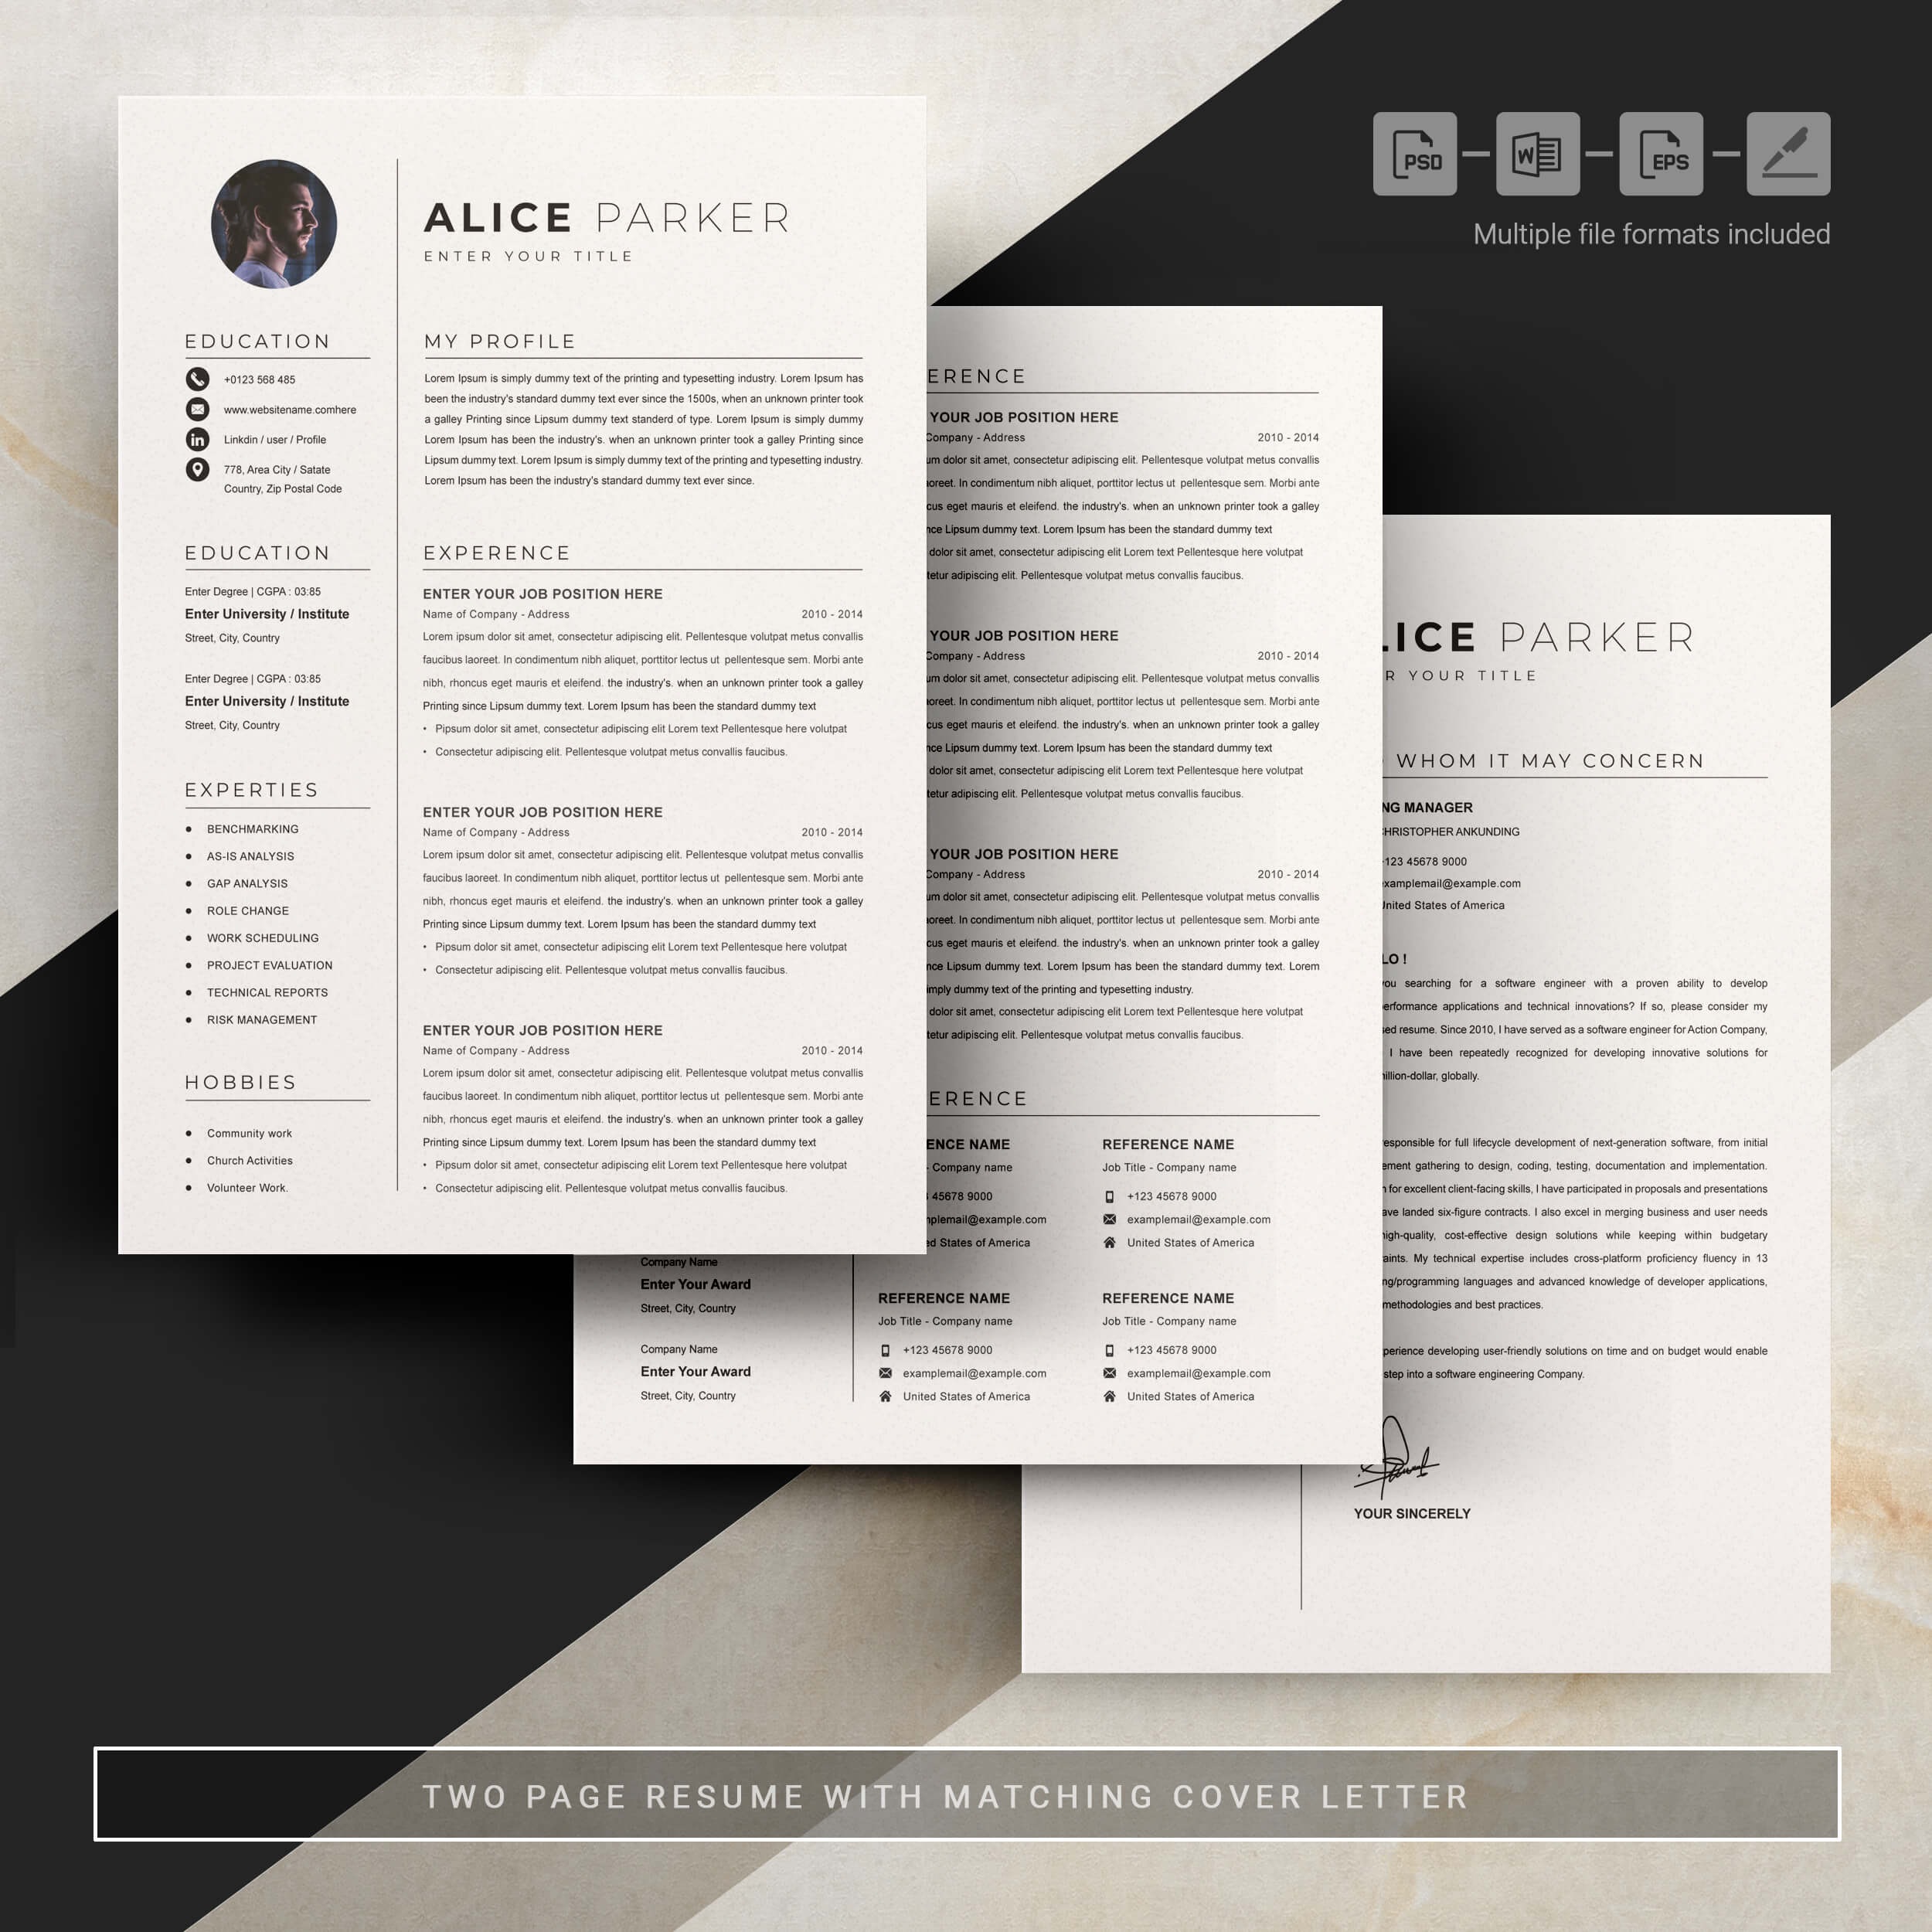 05 3 pages free resume design template 1 343